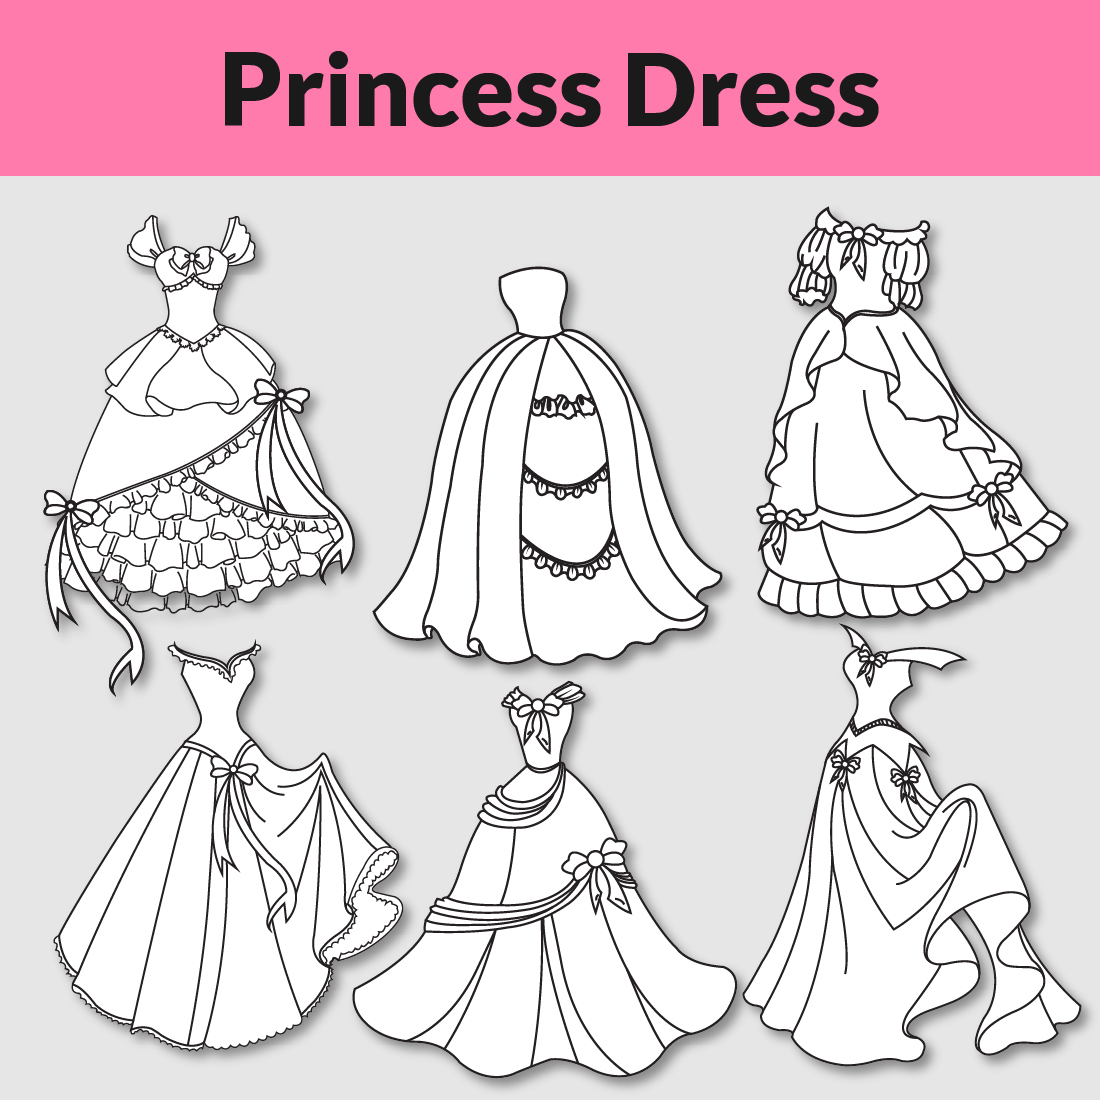 Pink Princess Dress For Prom. Pencil Sketch. Stock Photo, Picture and  Royalty Free Image. Image 144046821.